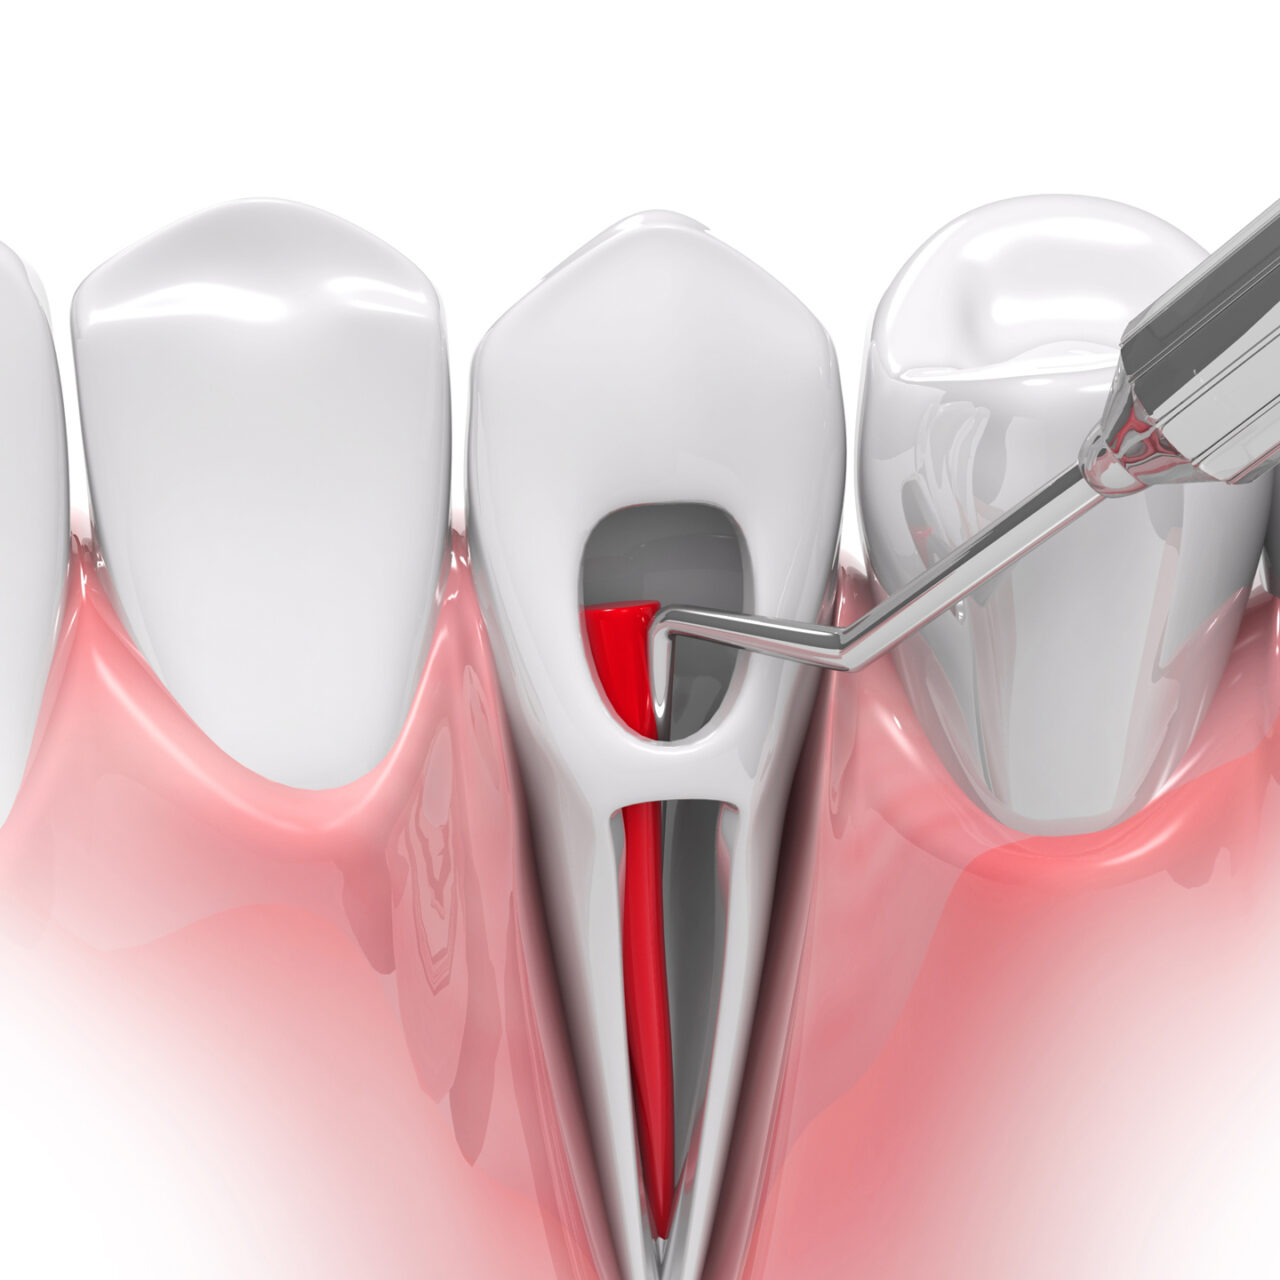 Root canal treatment process. 